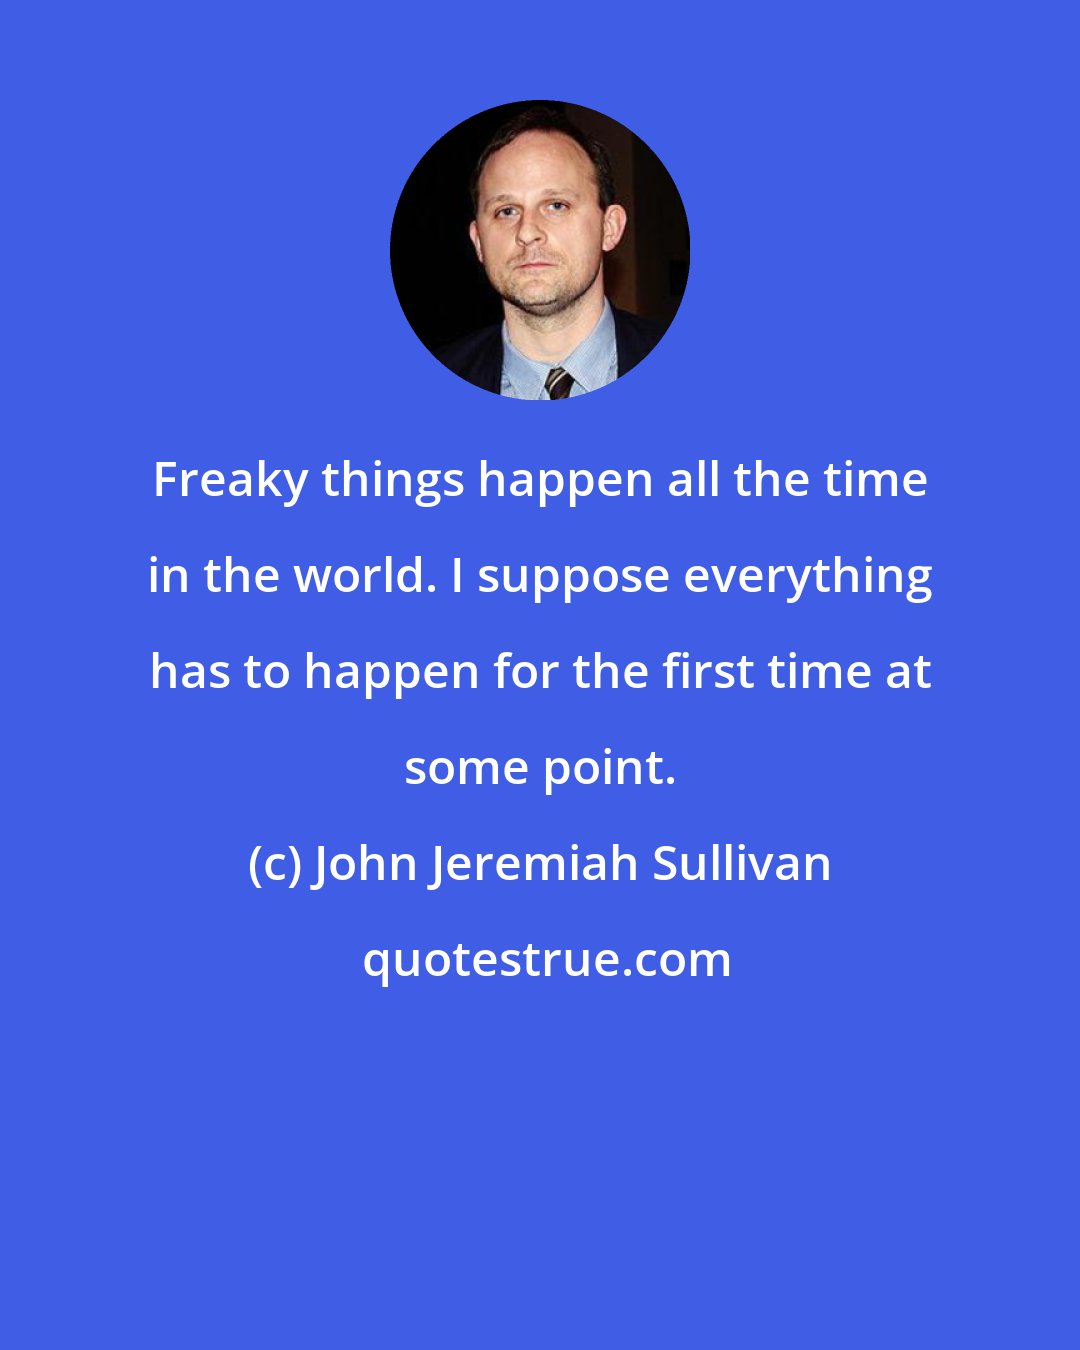 John Jeremiah Sullivan: Freaky things happen all the time in the world. I suppose everything has to happen for the first time at some point.